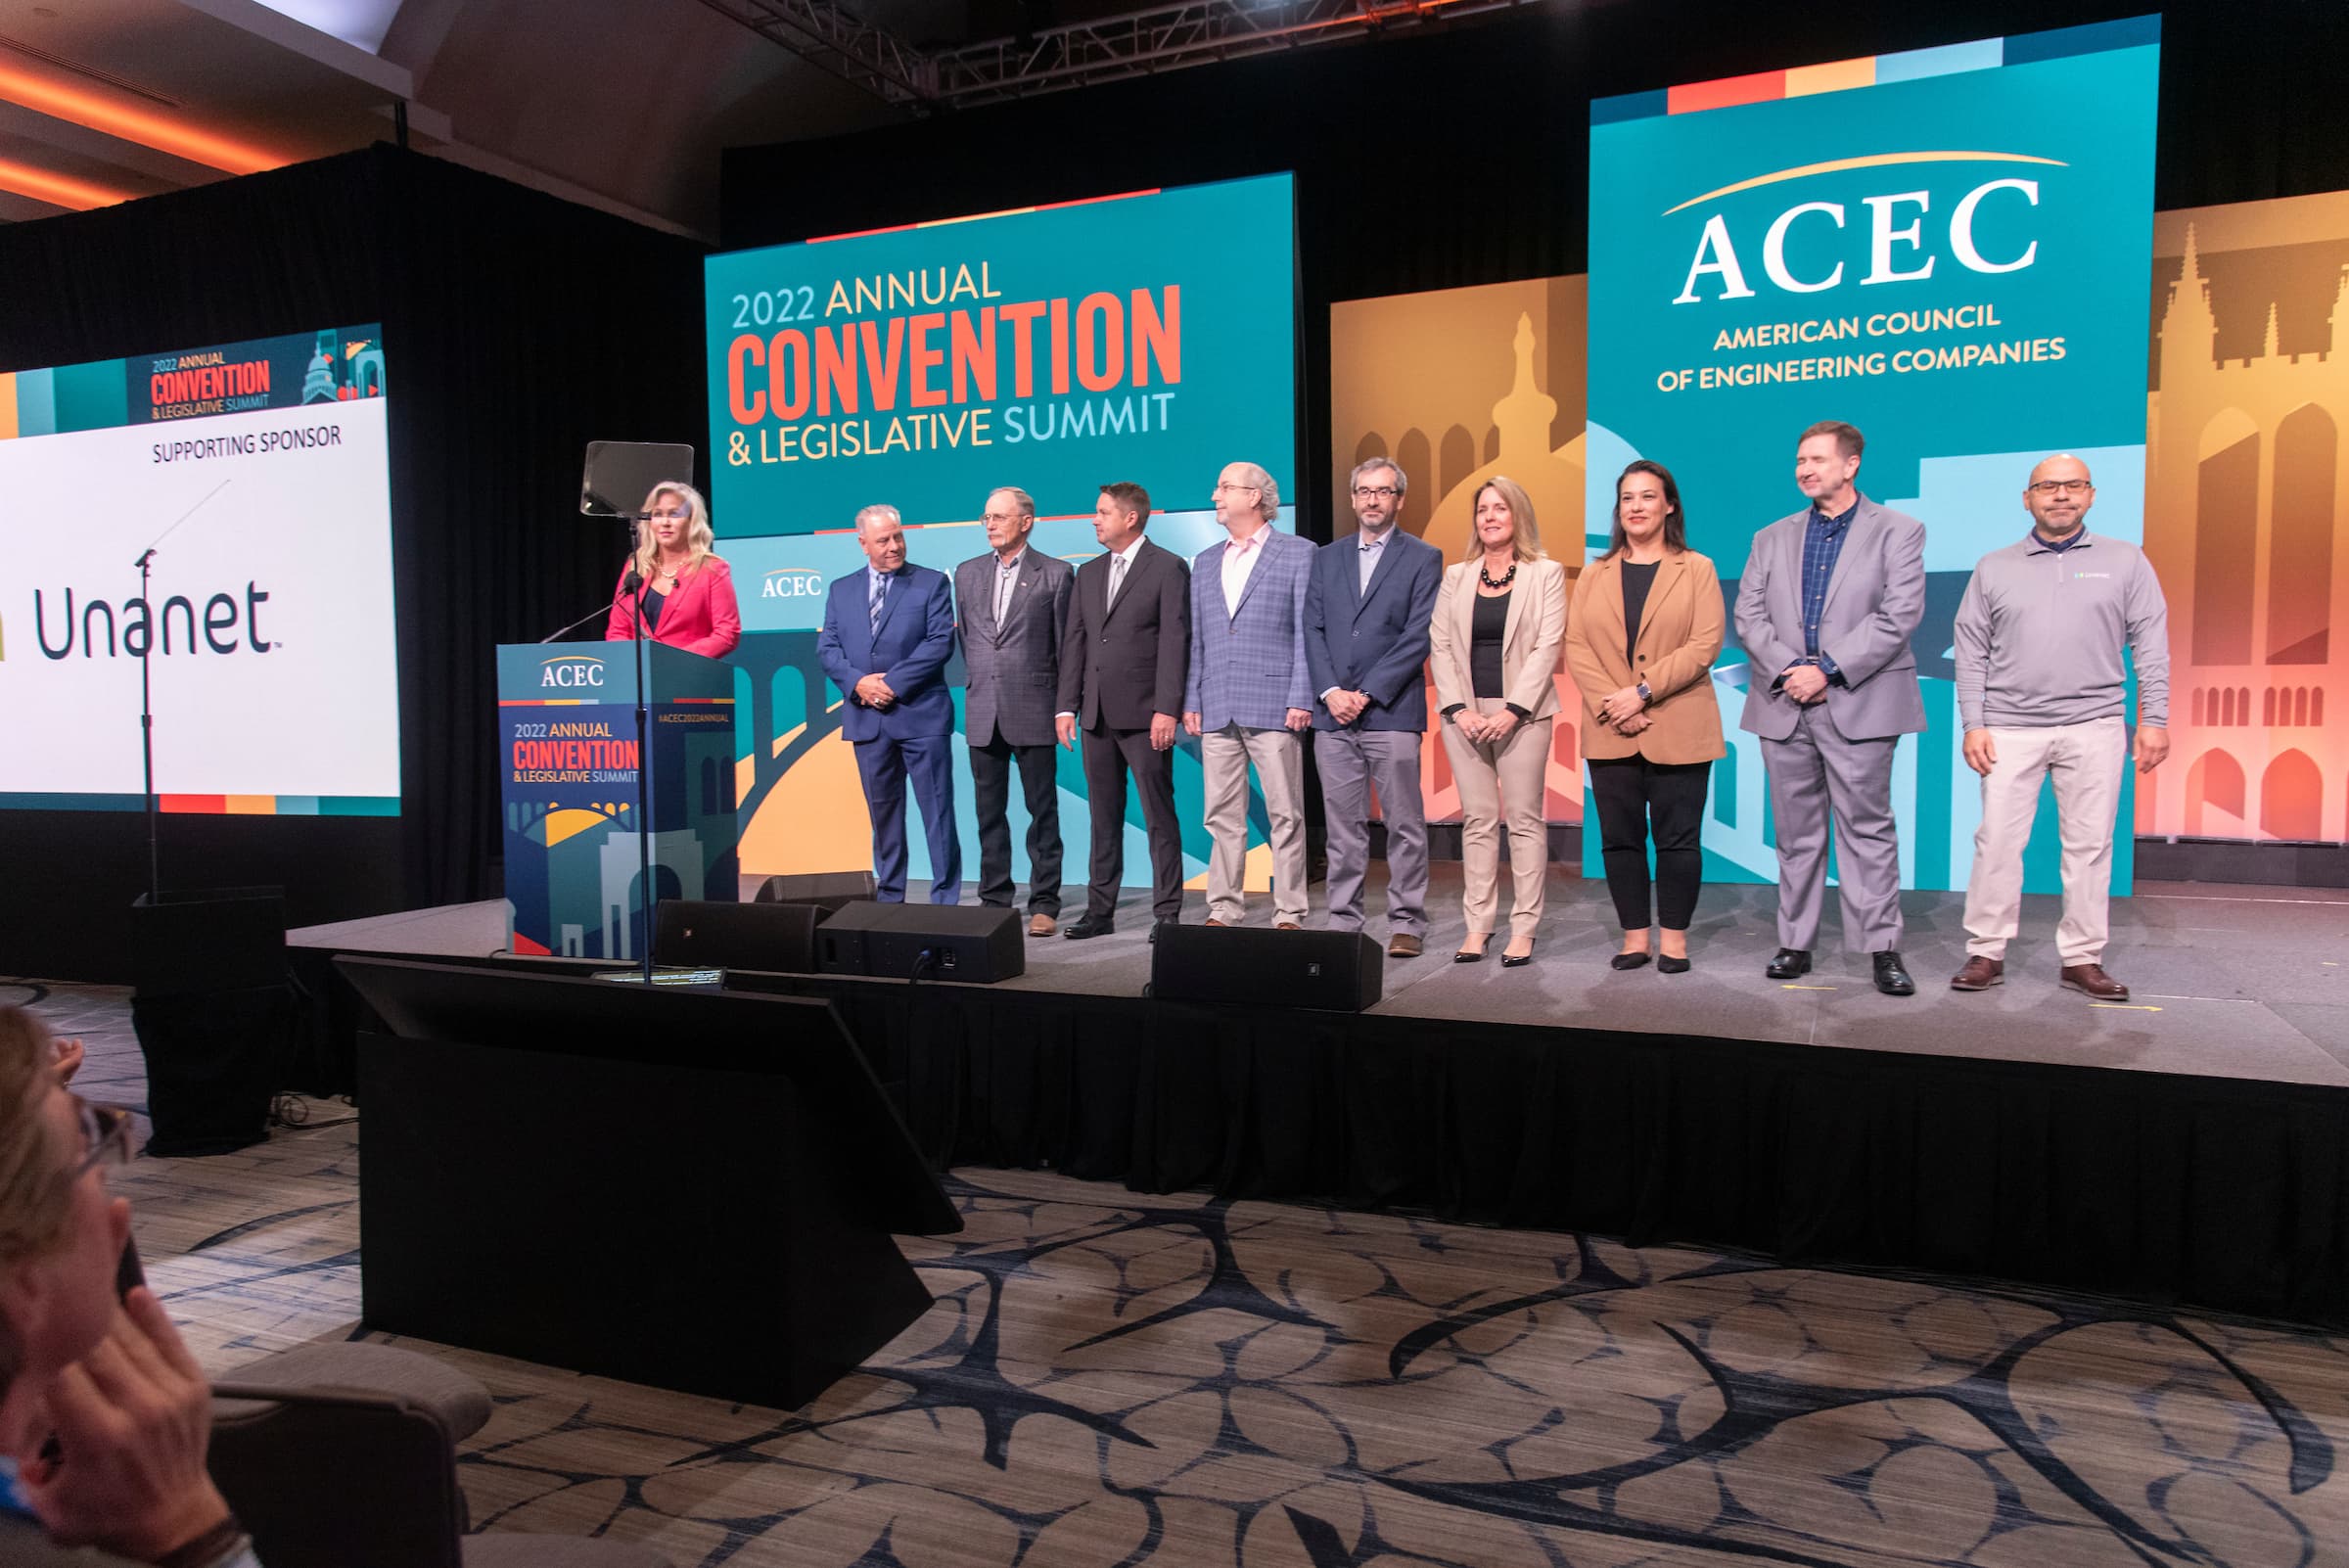 Awardees and other members standing on the stage during the ACEC 2022 annual convention and legislative summit